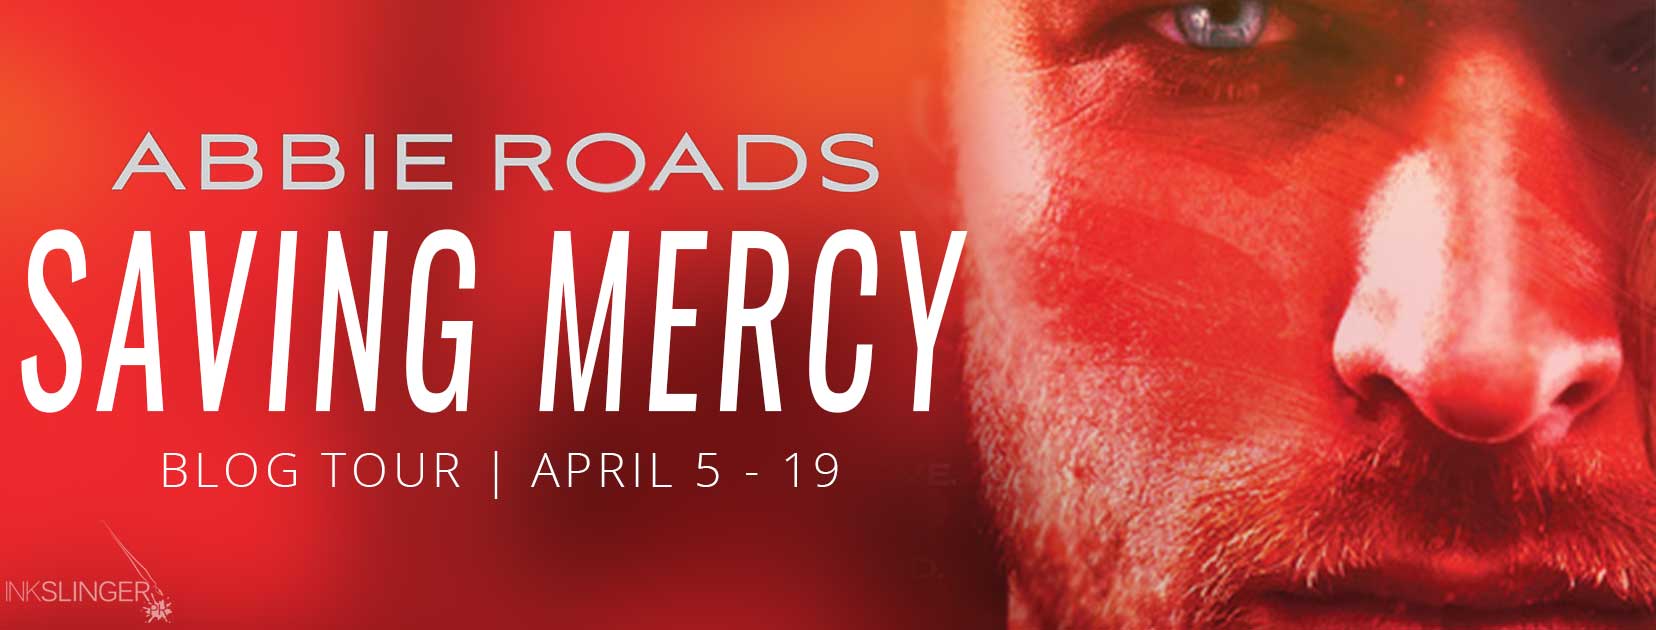 Review: Saving Mercy by Abbie Roads